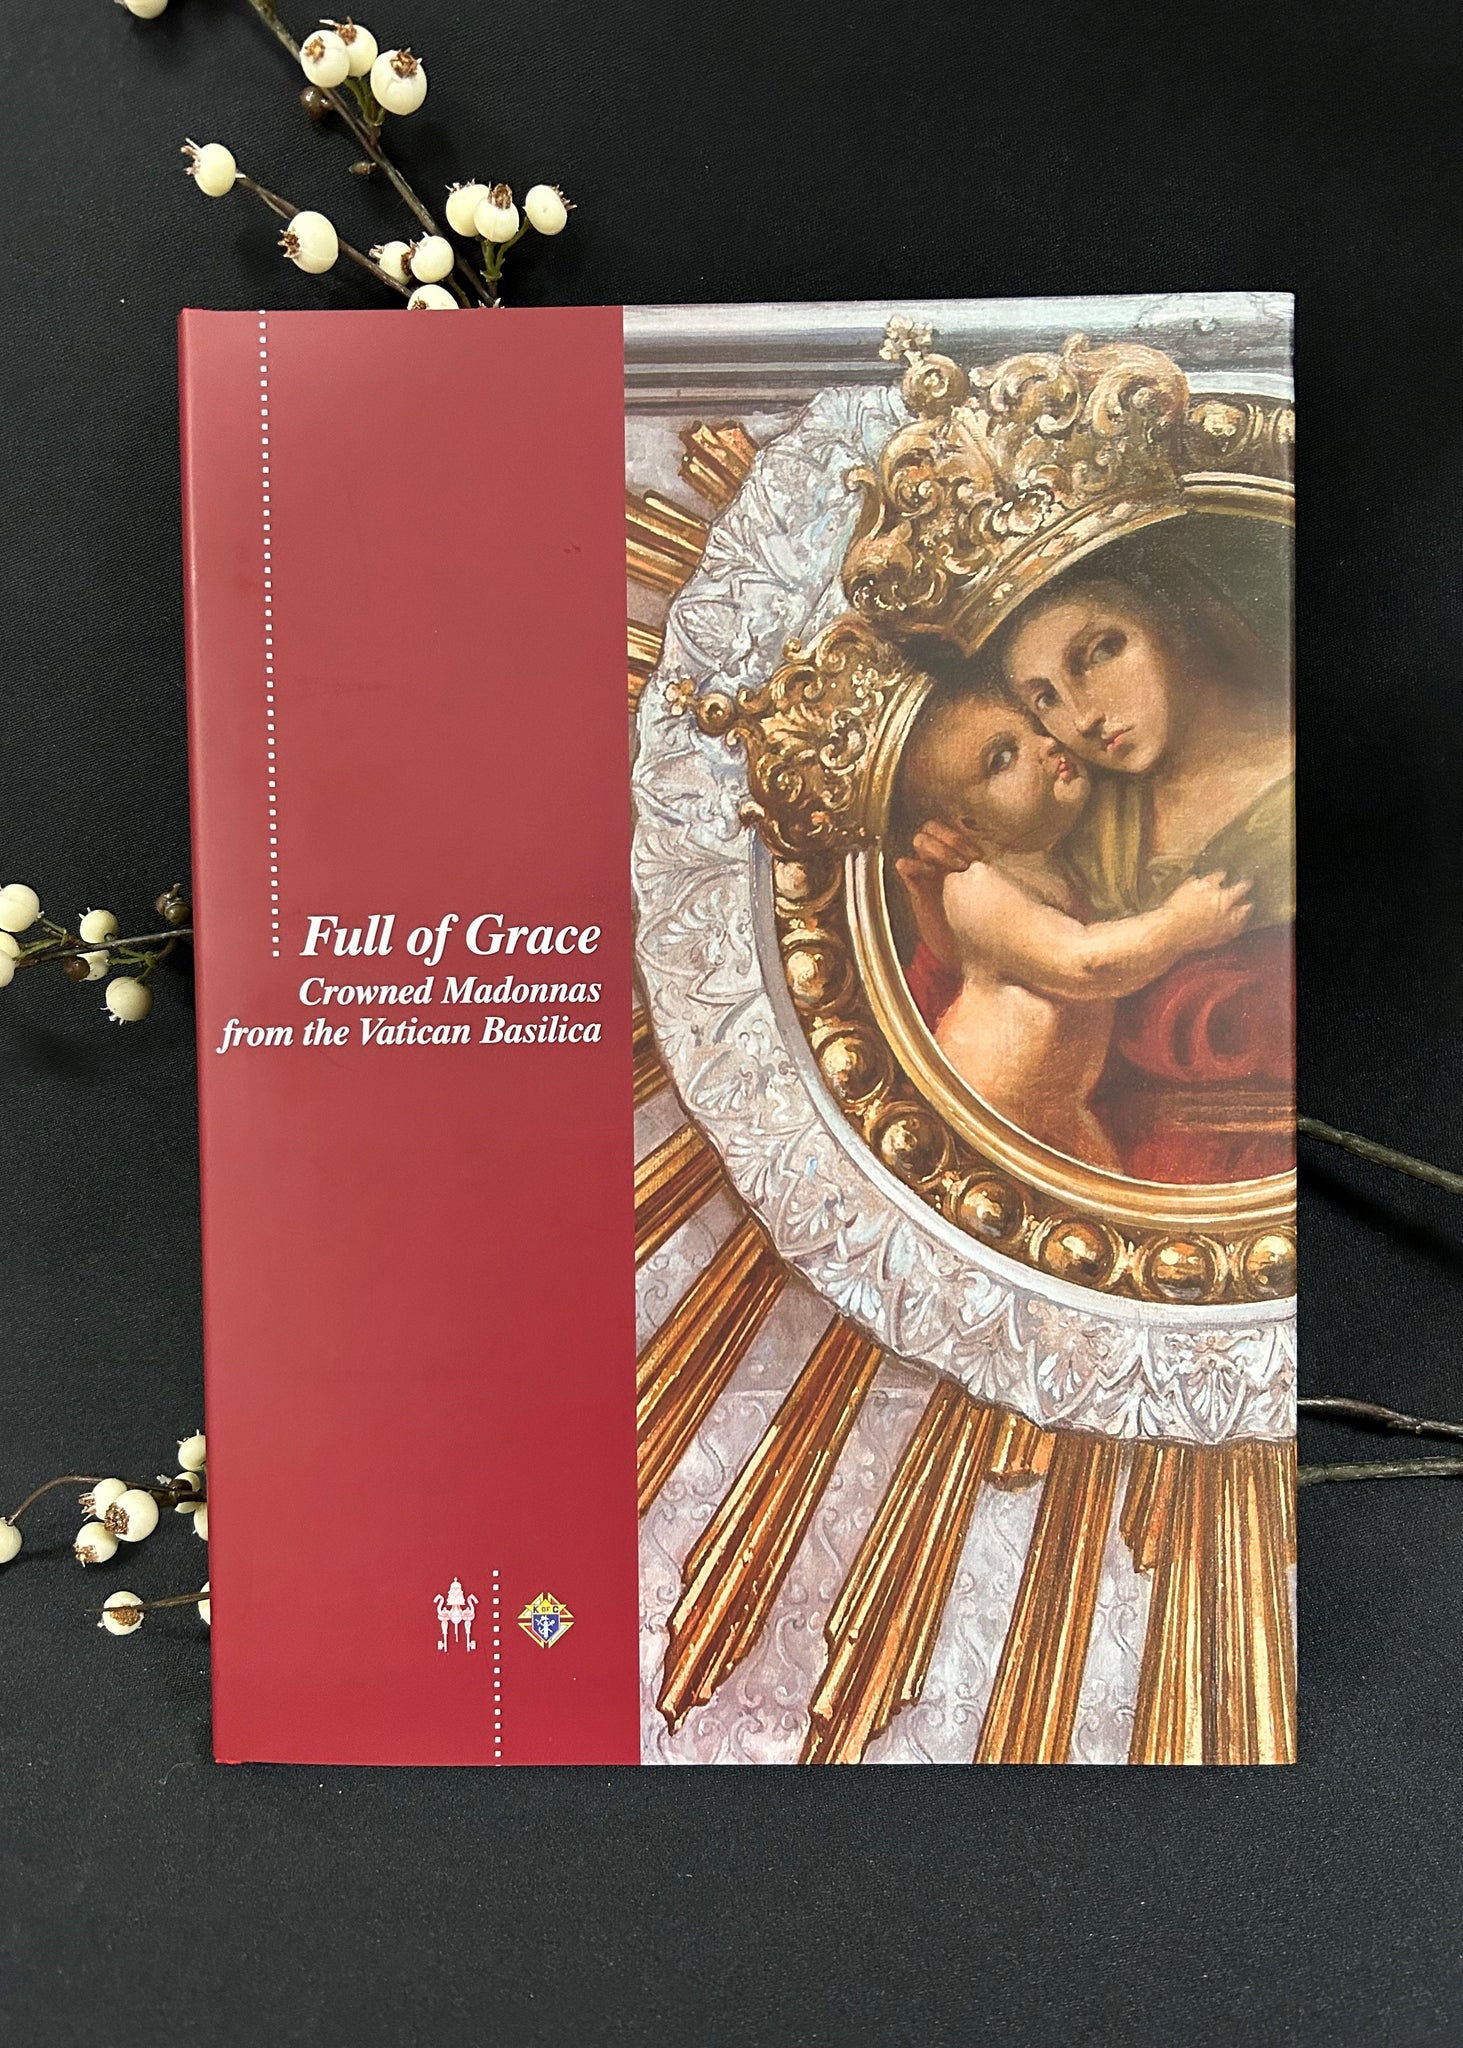 Full of Grace: Crowned Madonnas from the Vatican Basilica